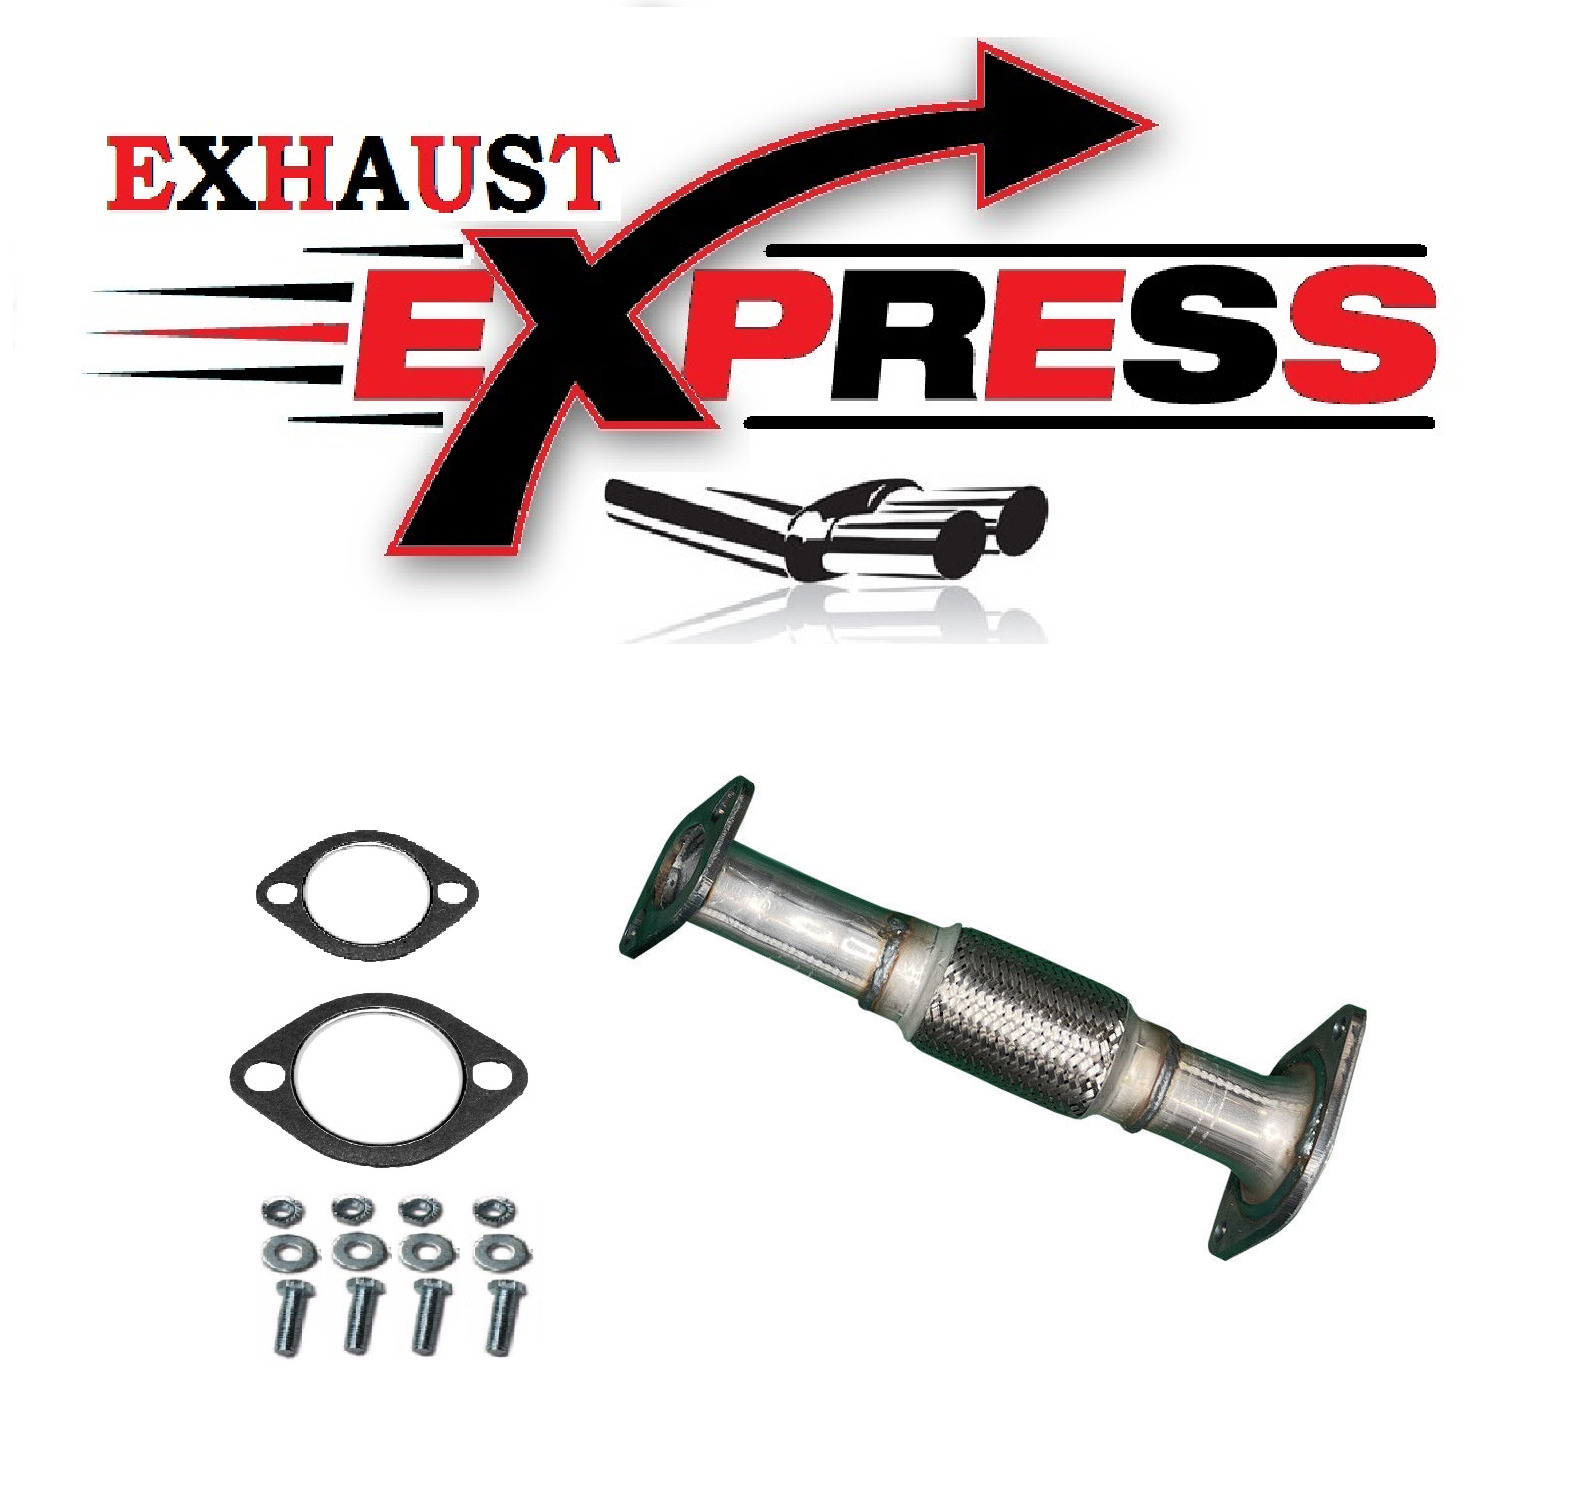 2011 & 2012 CHEVROLET MALIBU 2.4L * 6 SPEED TRANS ONLY* DIRECT FIT FLEX PIPE